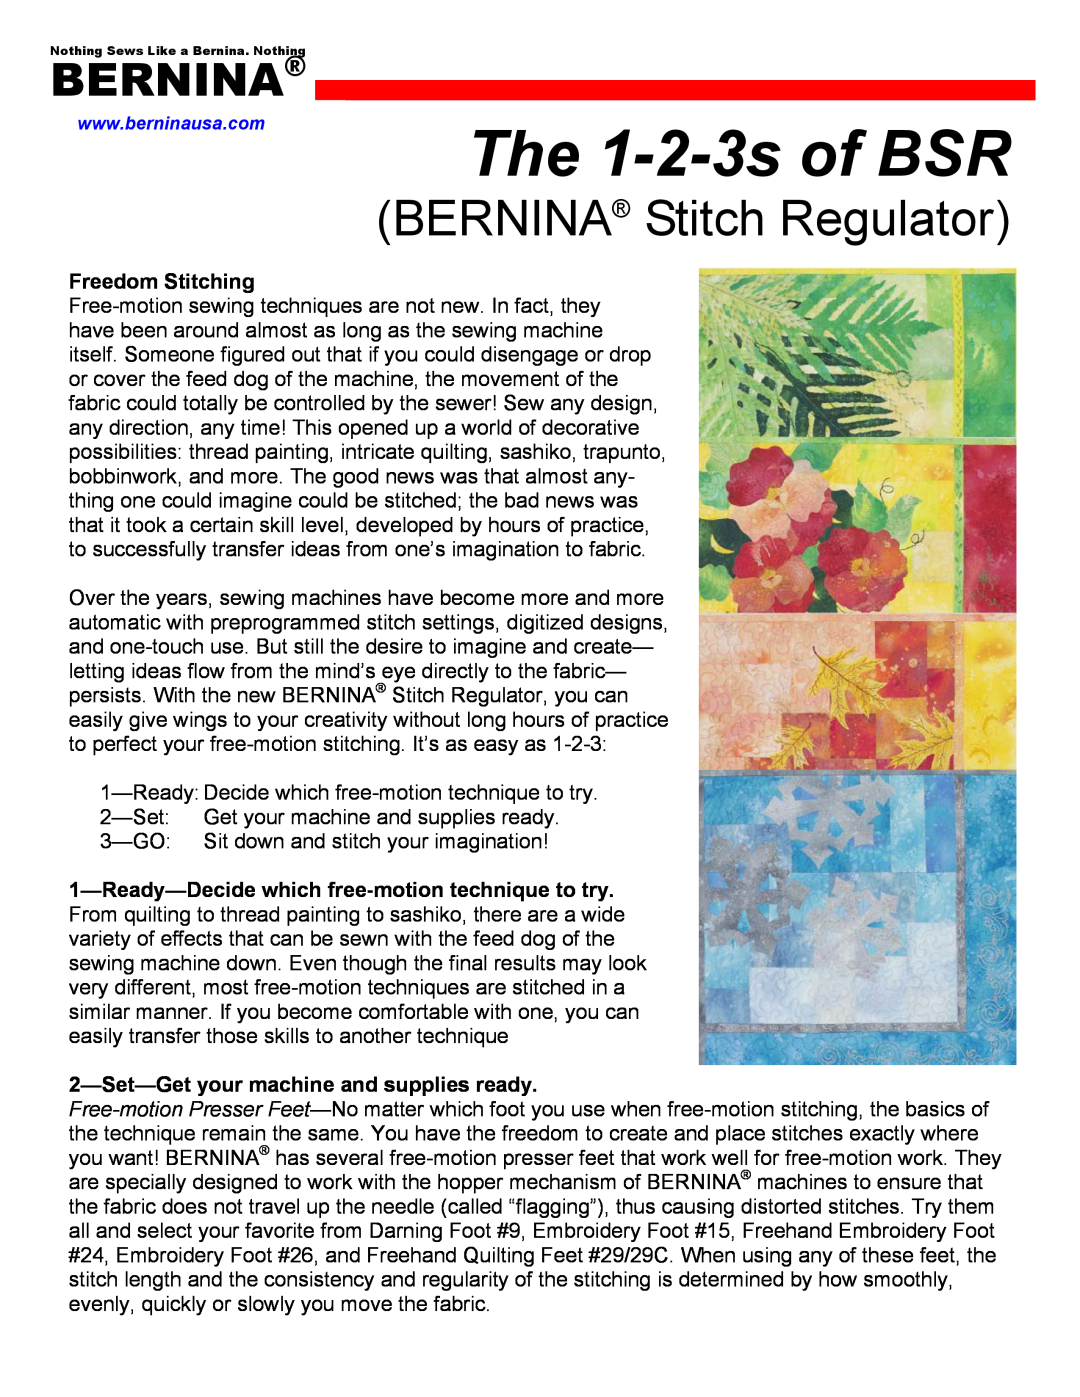 Bernina Switch Regulator manual Freedom Stitching, Set-Get your machine and supplies ready, The 1-2-3s of BSR, Bernina 